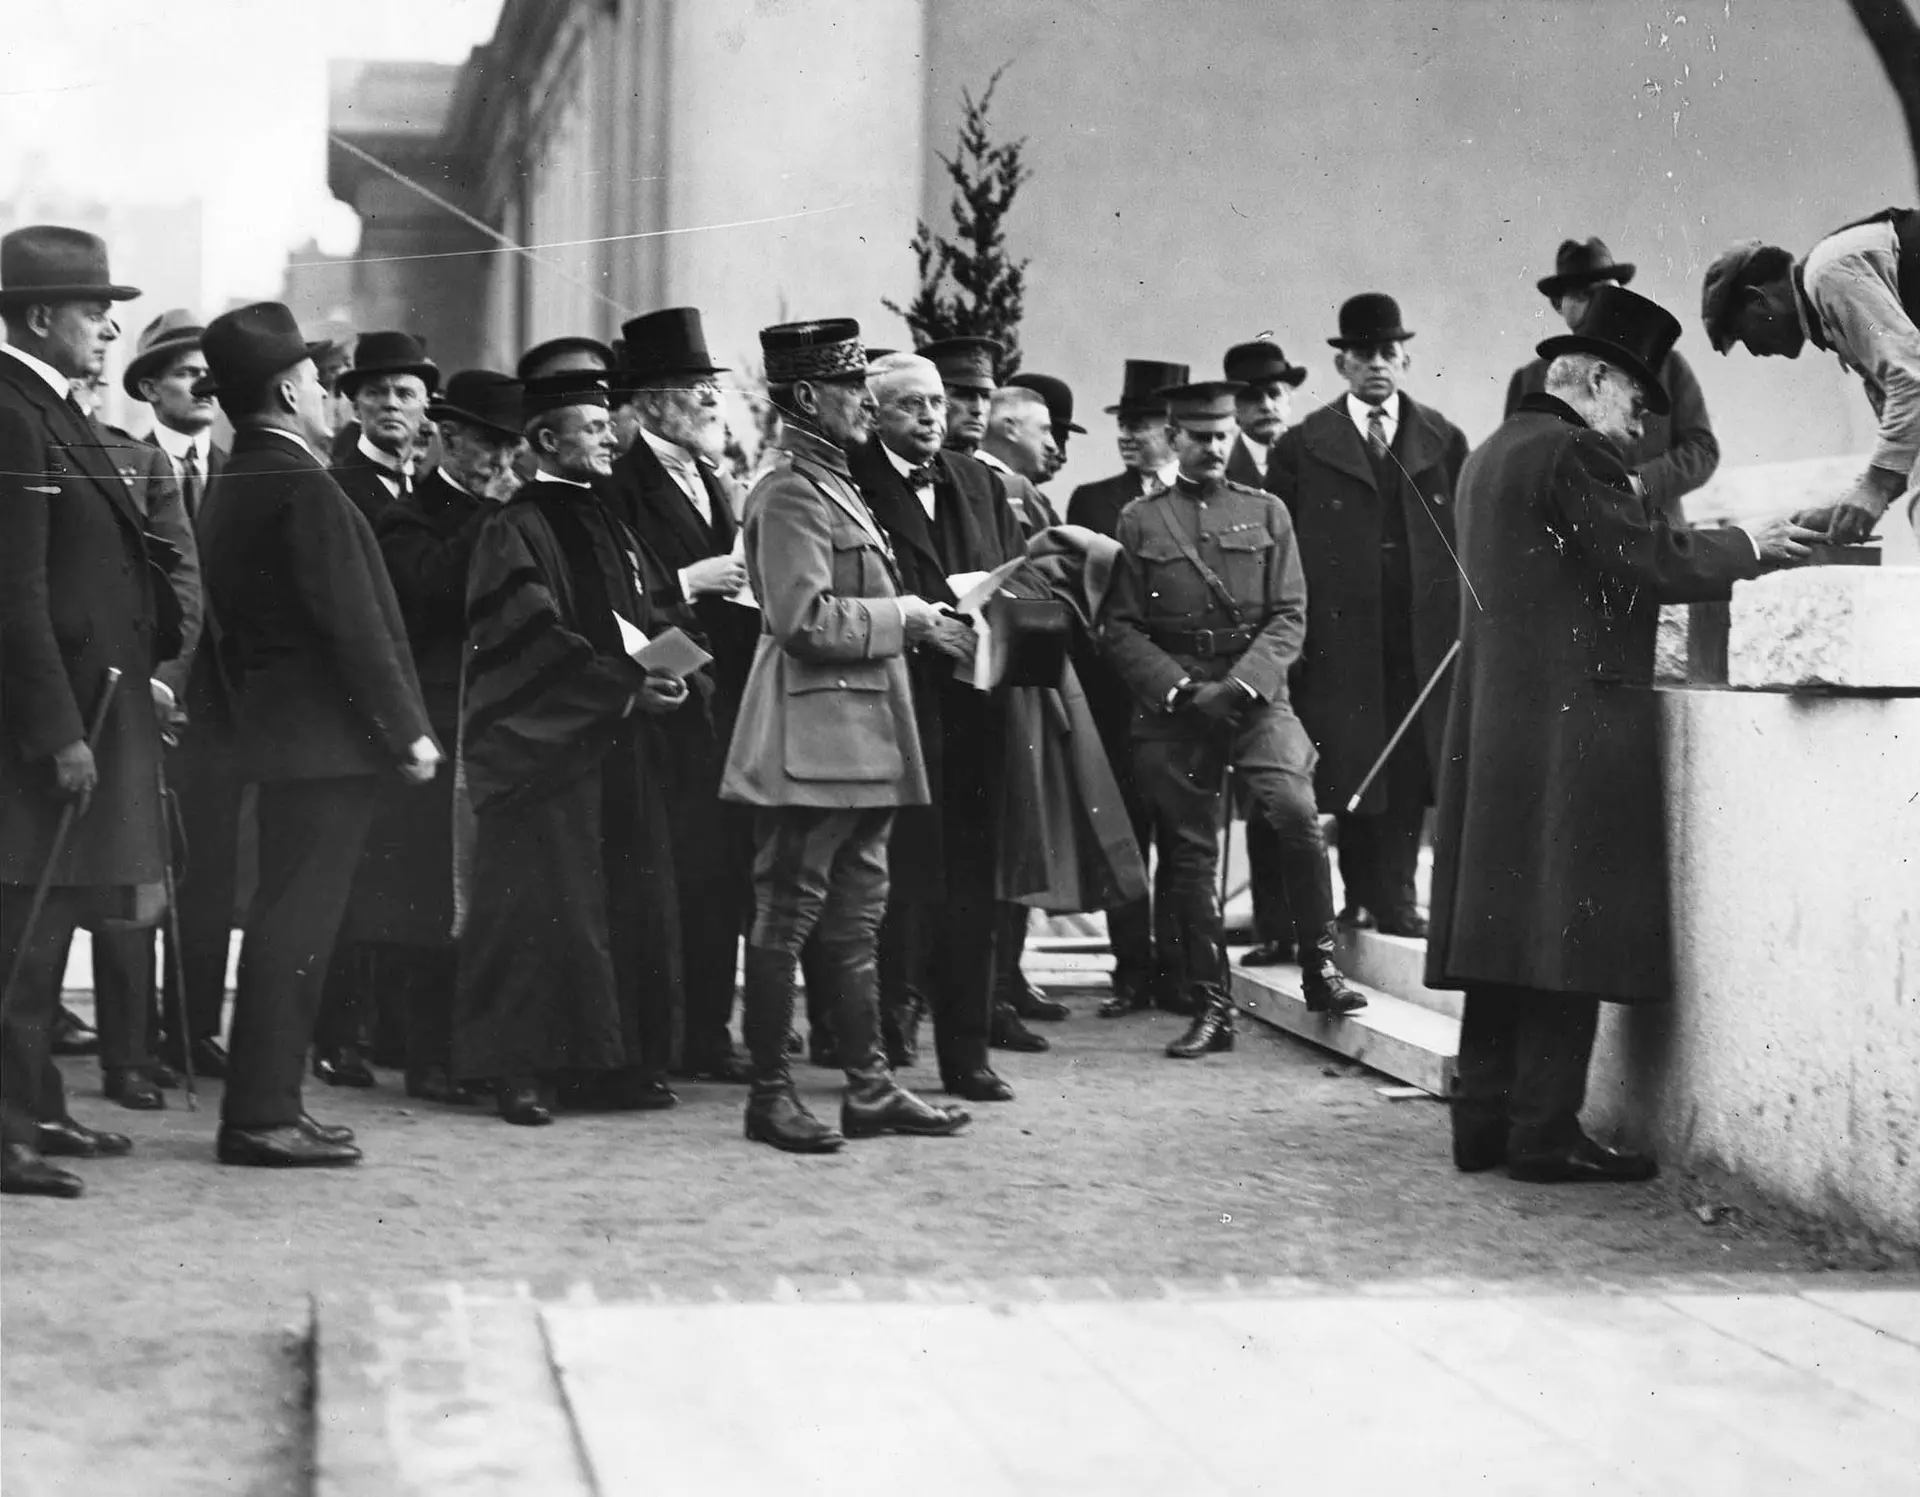 A black and white photograph of a group of men wearing suits and top hats looking towards two men setting a stone atop a waist high wall.